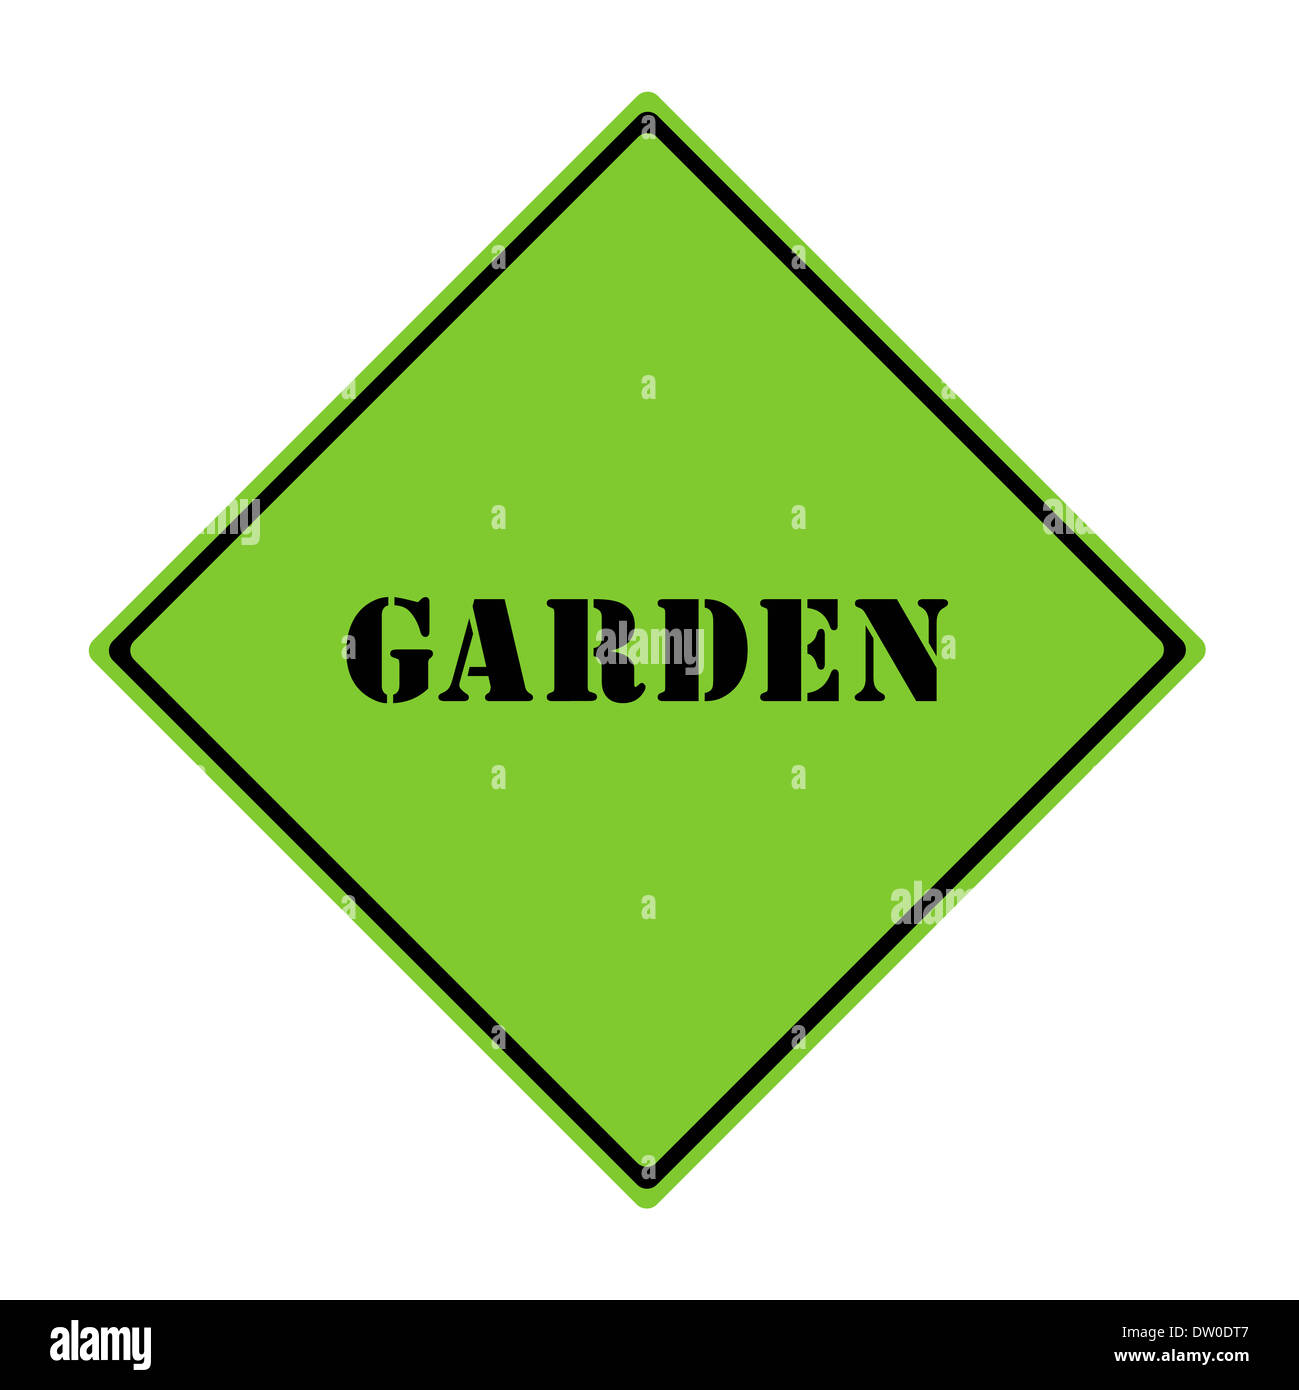 A green and black diamond shaped road sign with the word GARDEN making a great concept. Stock Photo